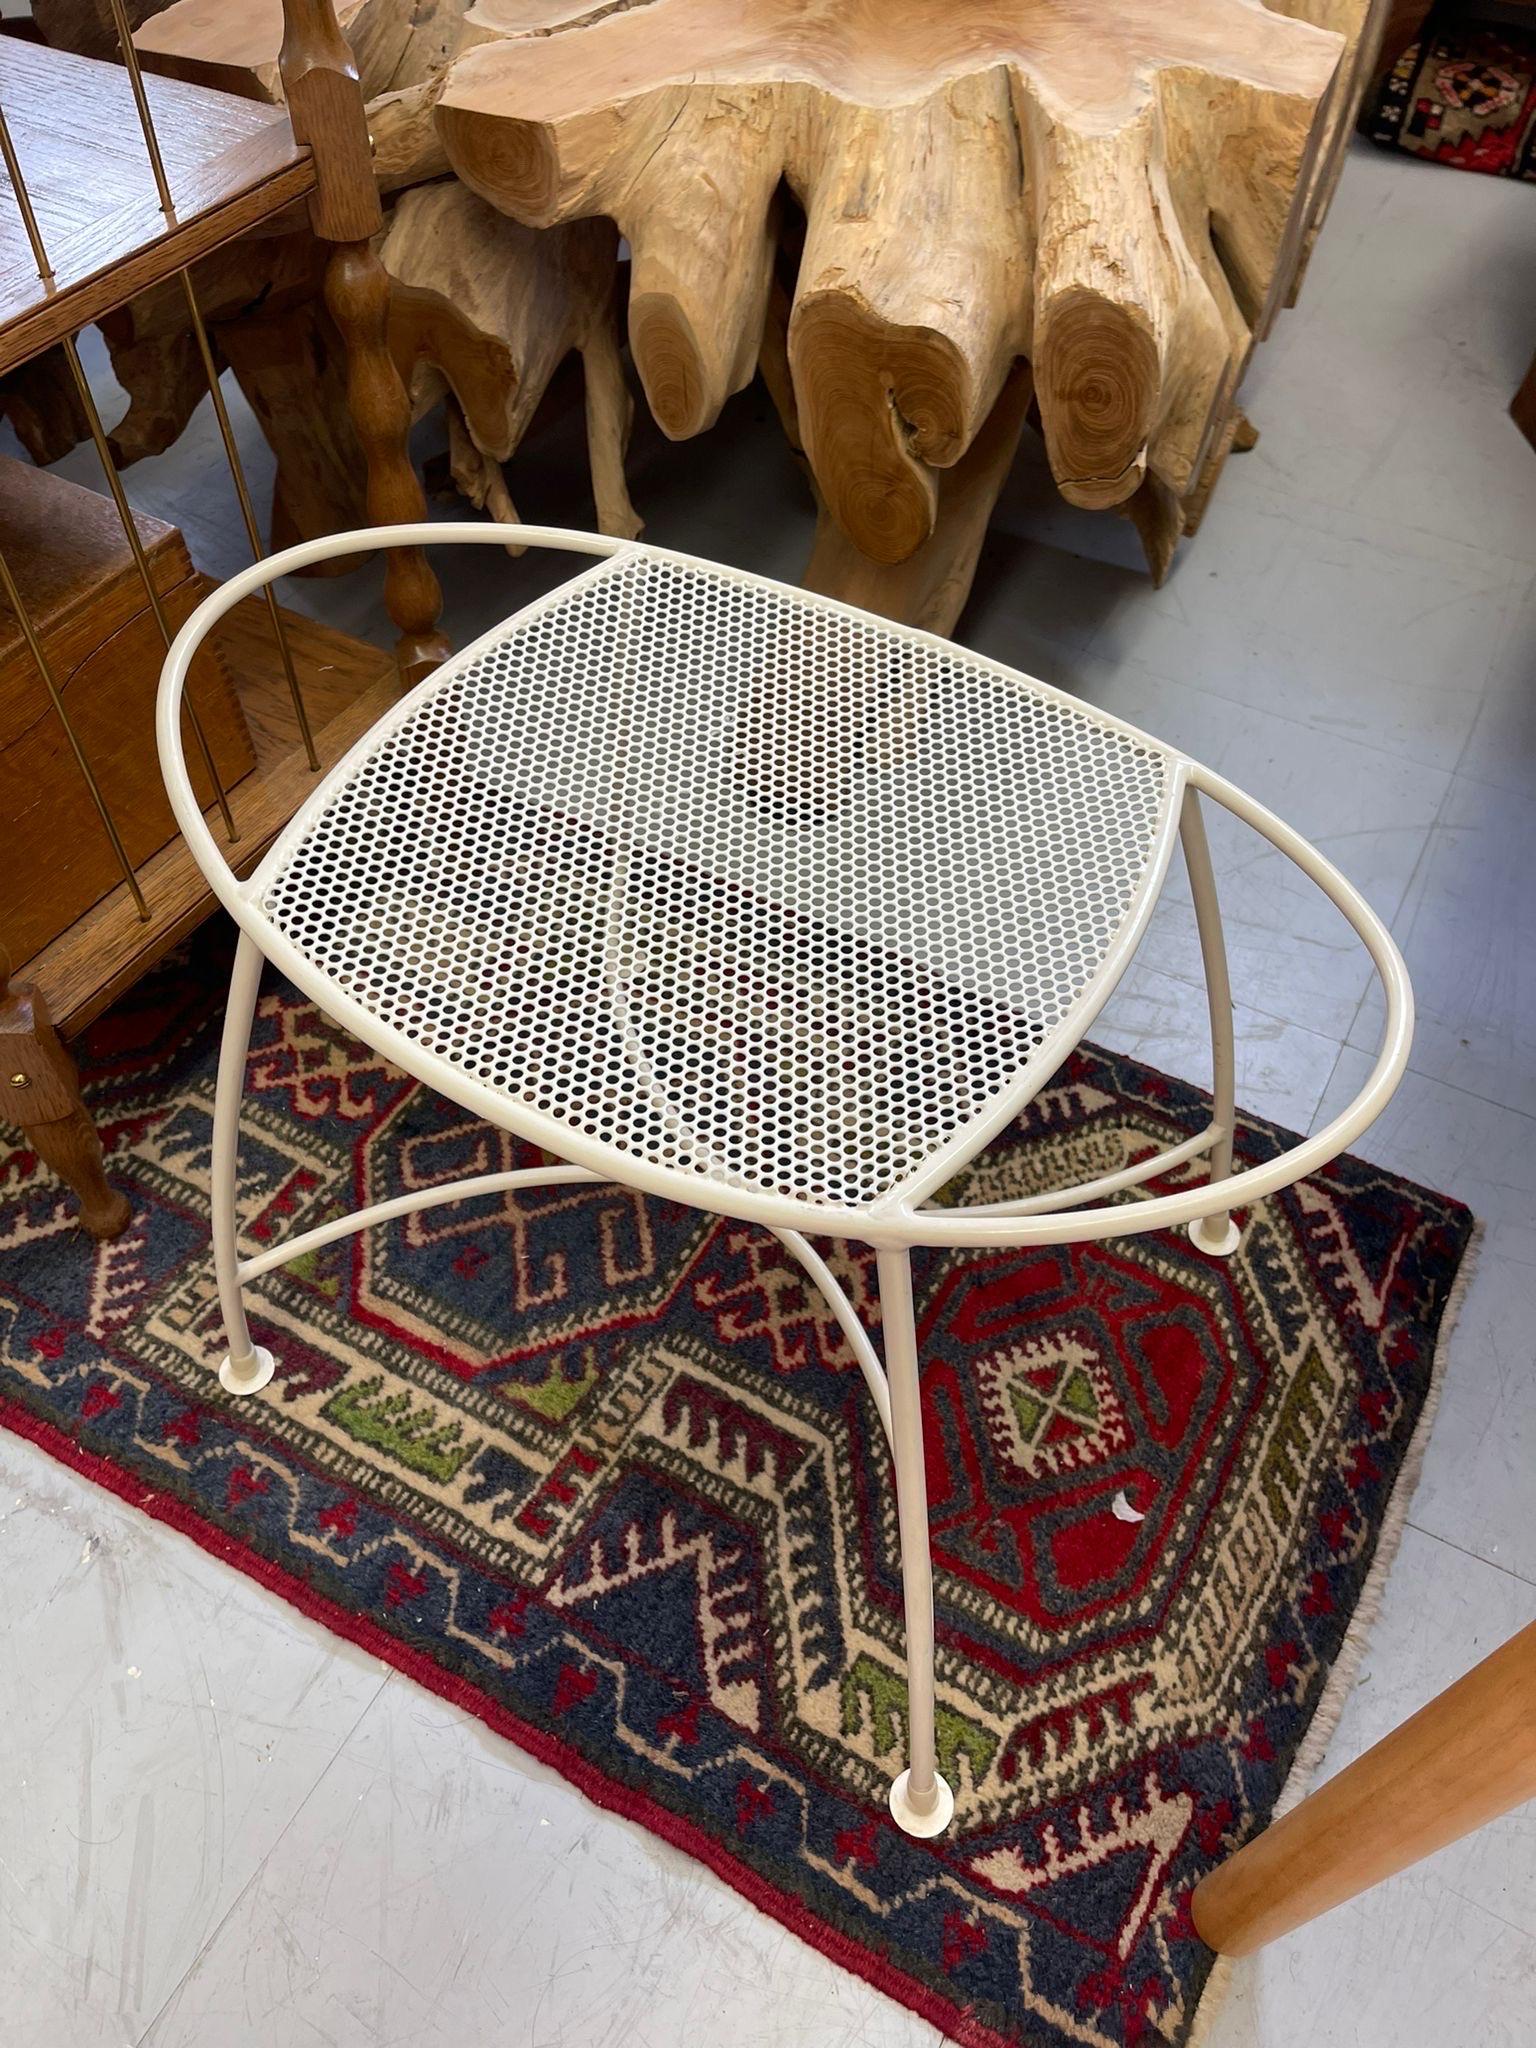 This Space Age Design Bench has Beautiful Lines Throughout. Possibly Metal or other Similar Material.

Dimensions. 20 W ; 13 D ; 15 H